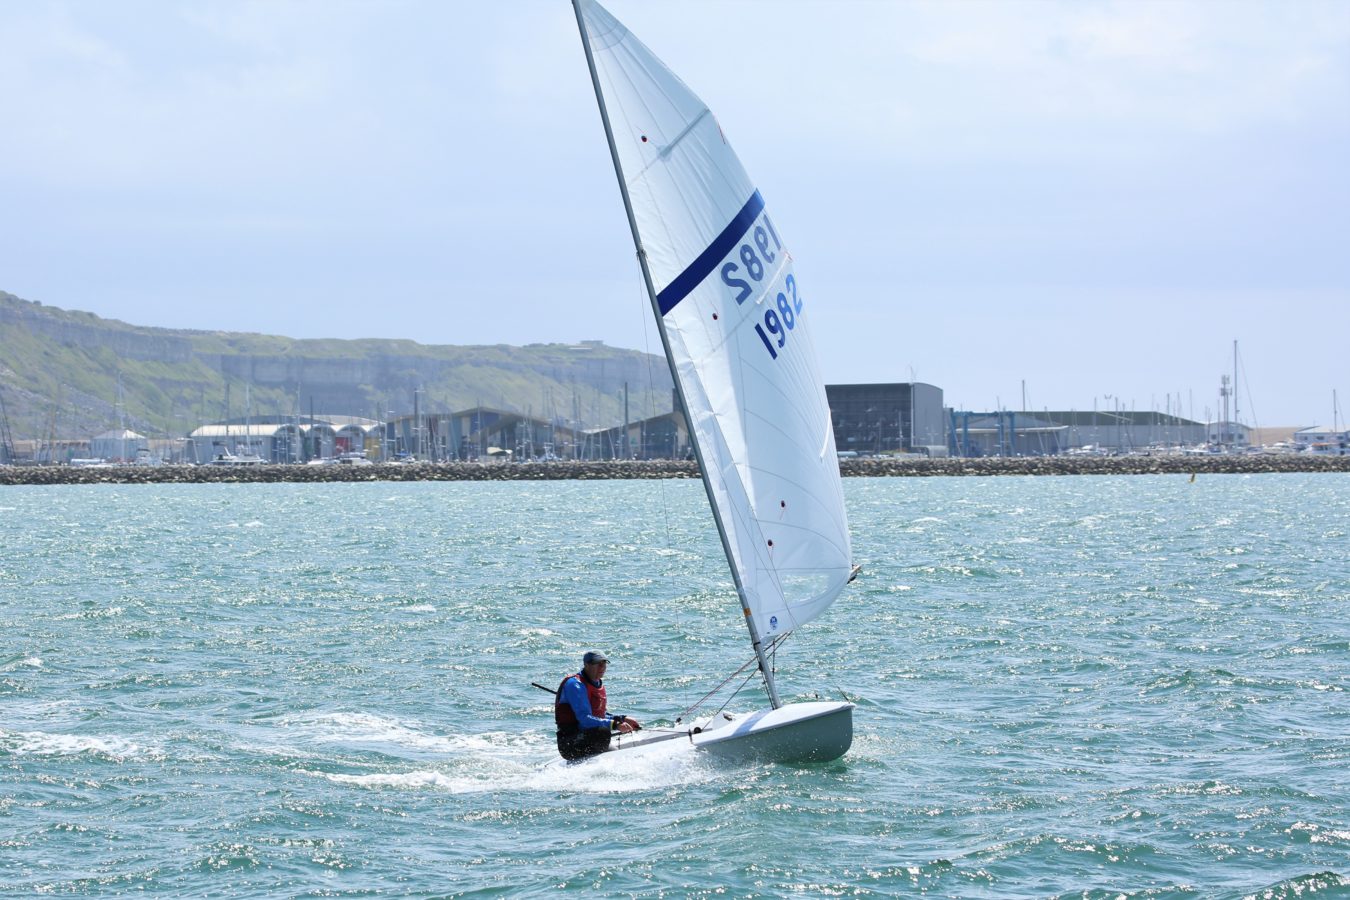 UK NATIONALS VICTORY WITH G-3R SAIL